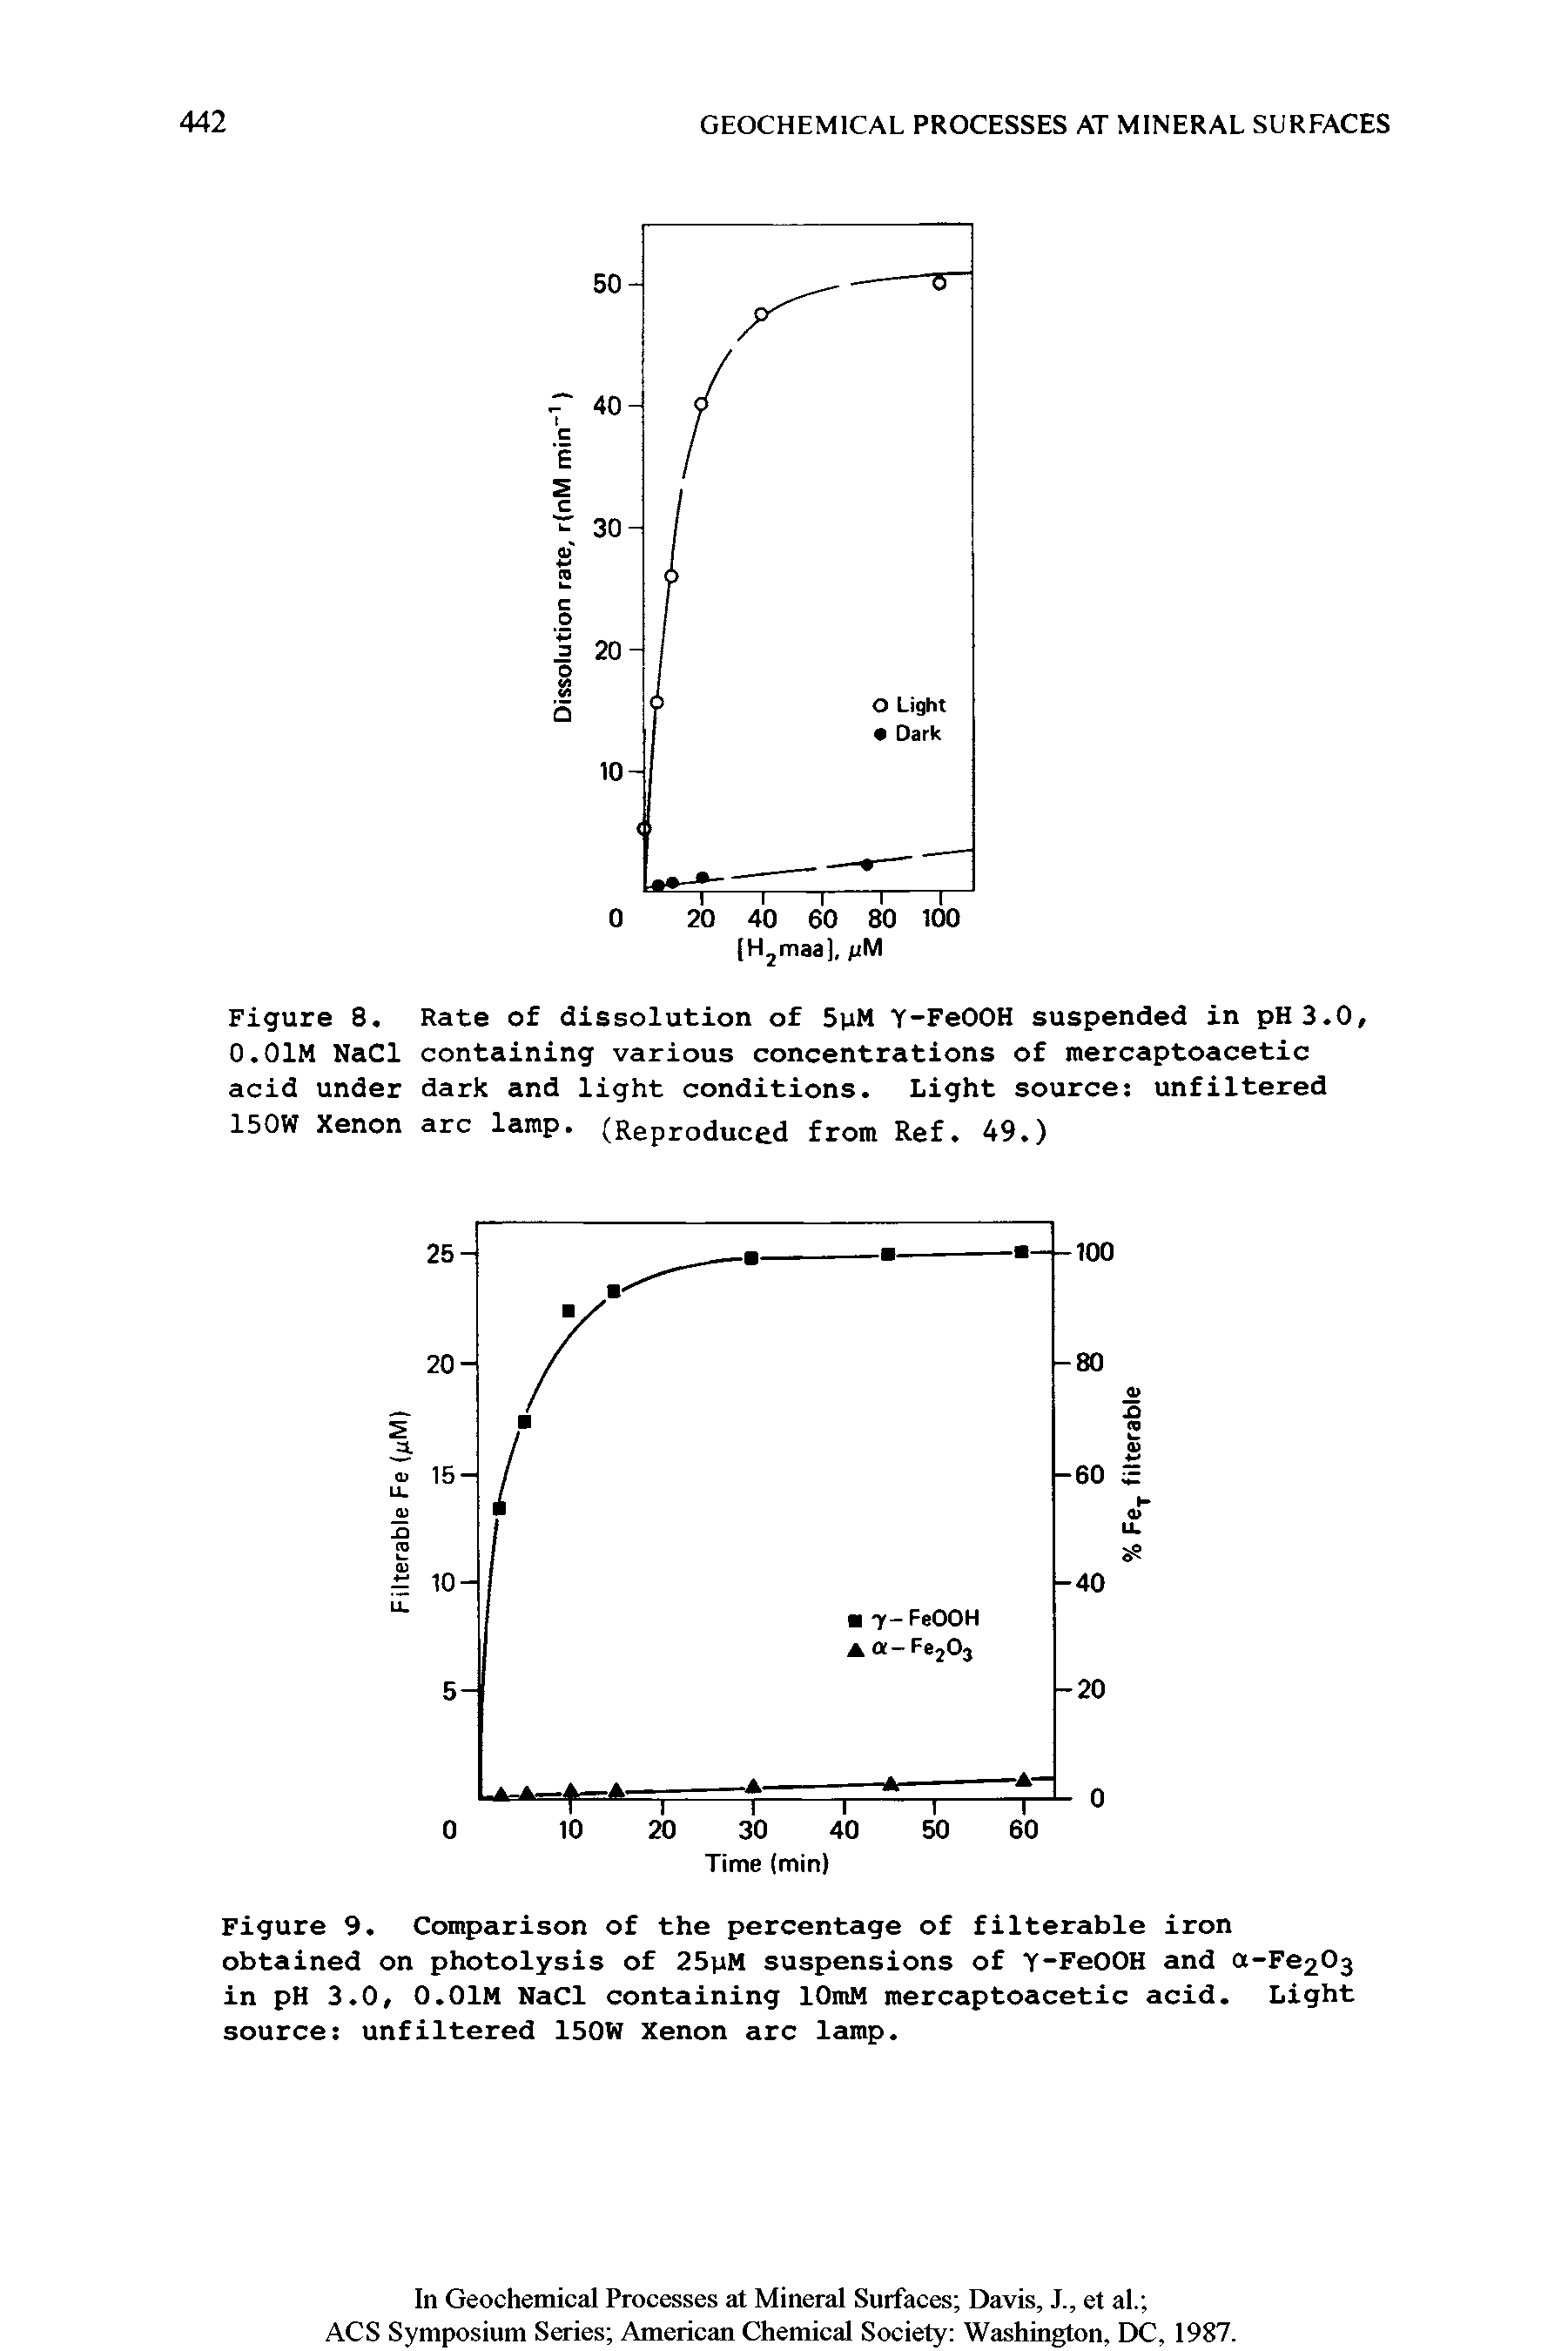 Figure 9. Comparison of the percentage of filterable iron obtained on photolysis of 25pM suspensions of Y-FeOOH and a-Fe203 in pH 3.0, 0.01M NaCl containing lOmM mercaptoacetic acid. Light source unfiltered 150W Xenon arc lamp.